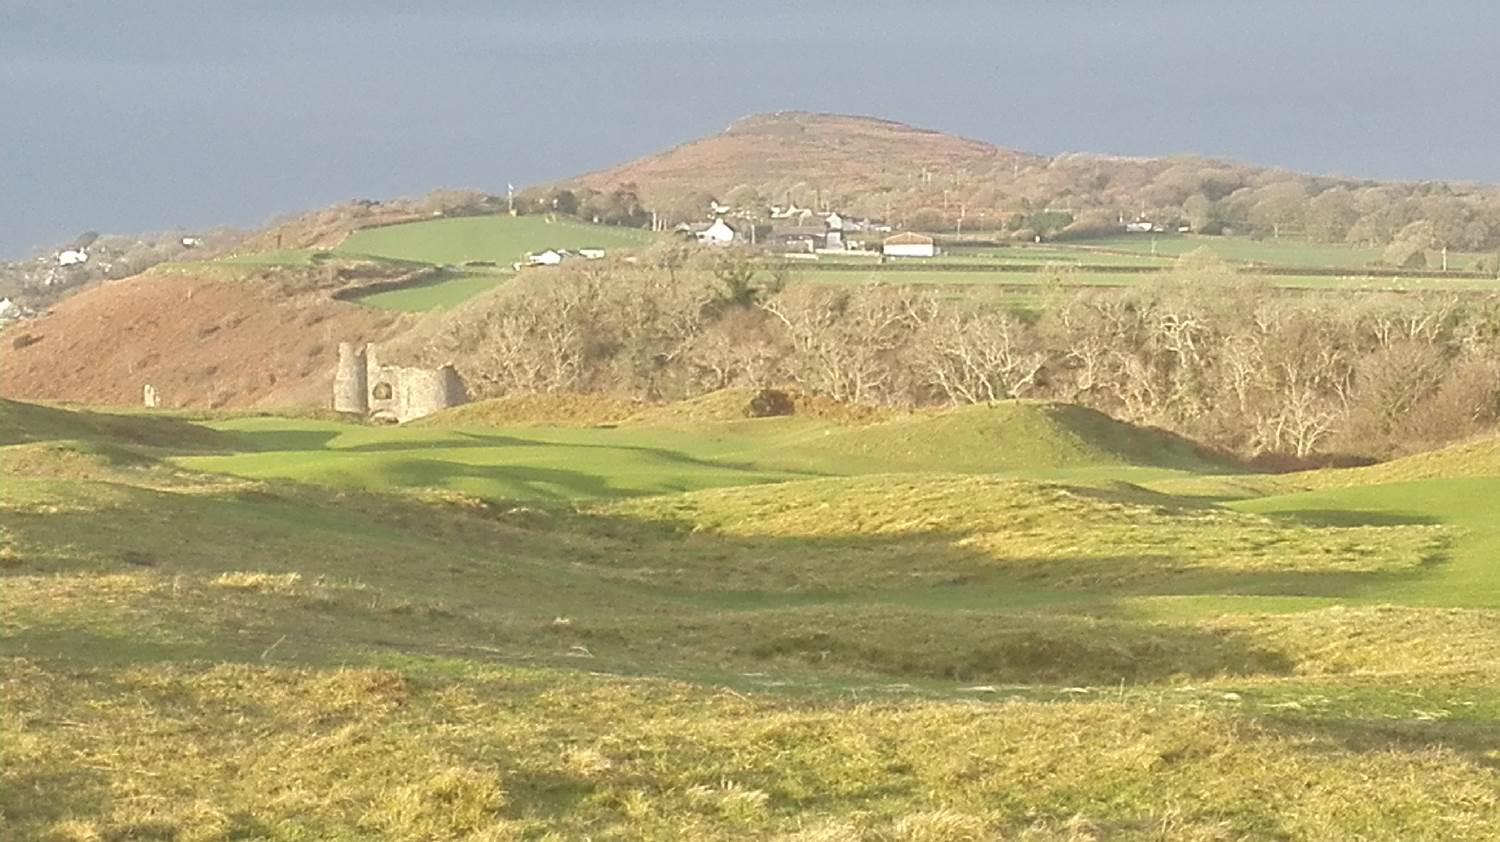 With Cefn Bryn in the background, and Pennard Castle on the edge of Pennard Golf Course, Gower shows off its shades of Green